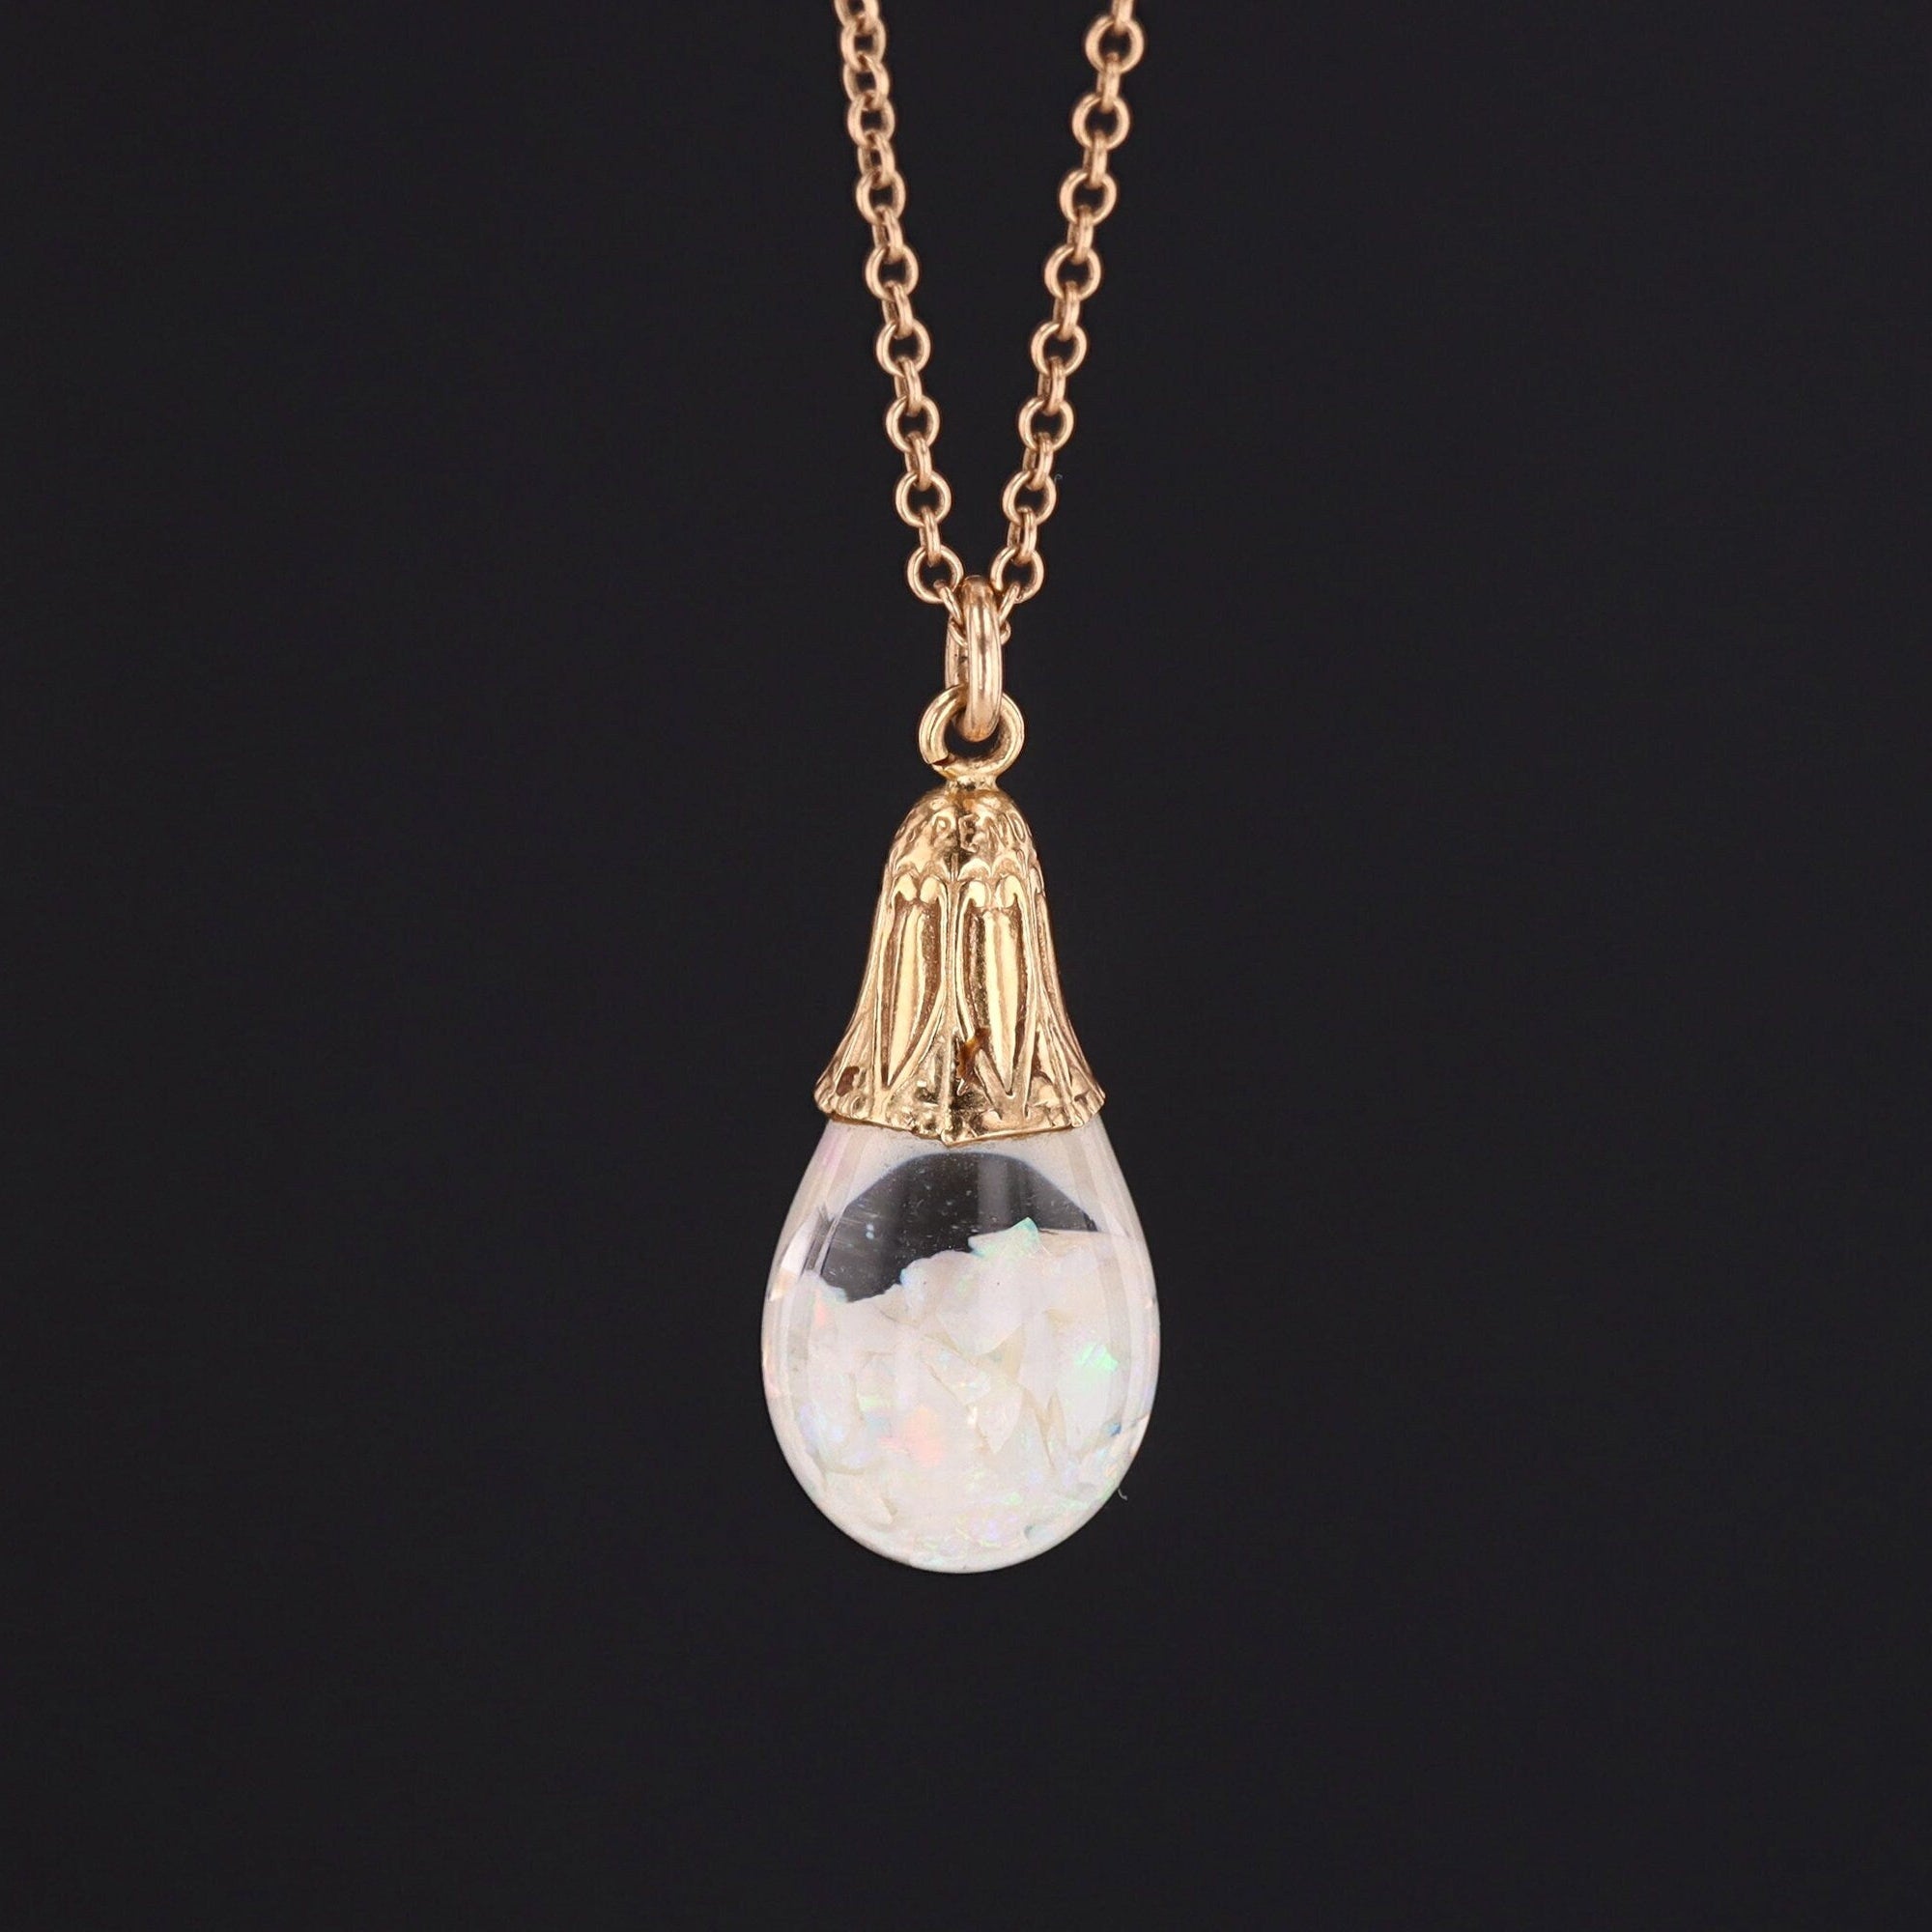 Floating Opal Charm | 14k Gold Charm on Optional 14k Gold Chain 